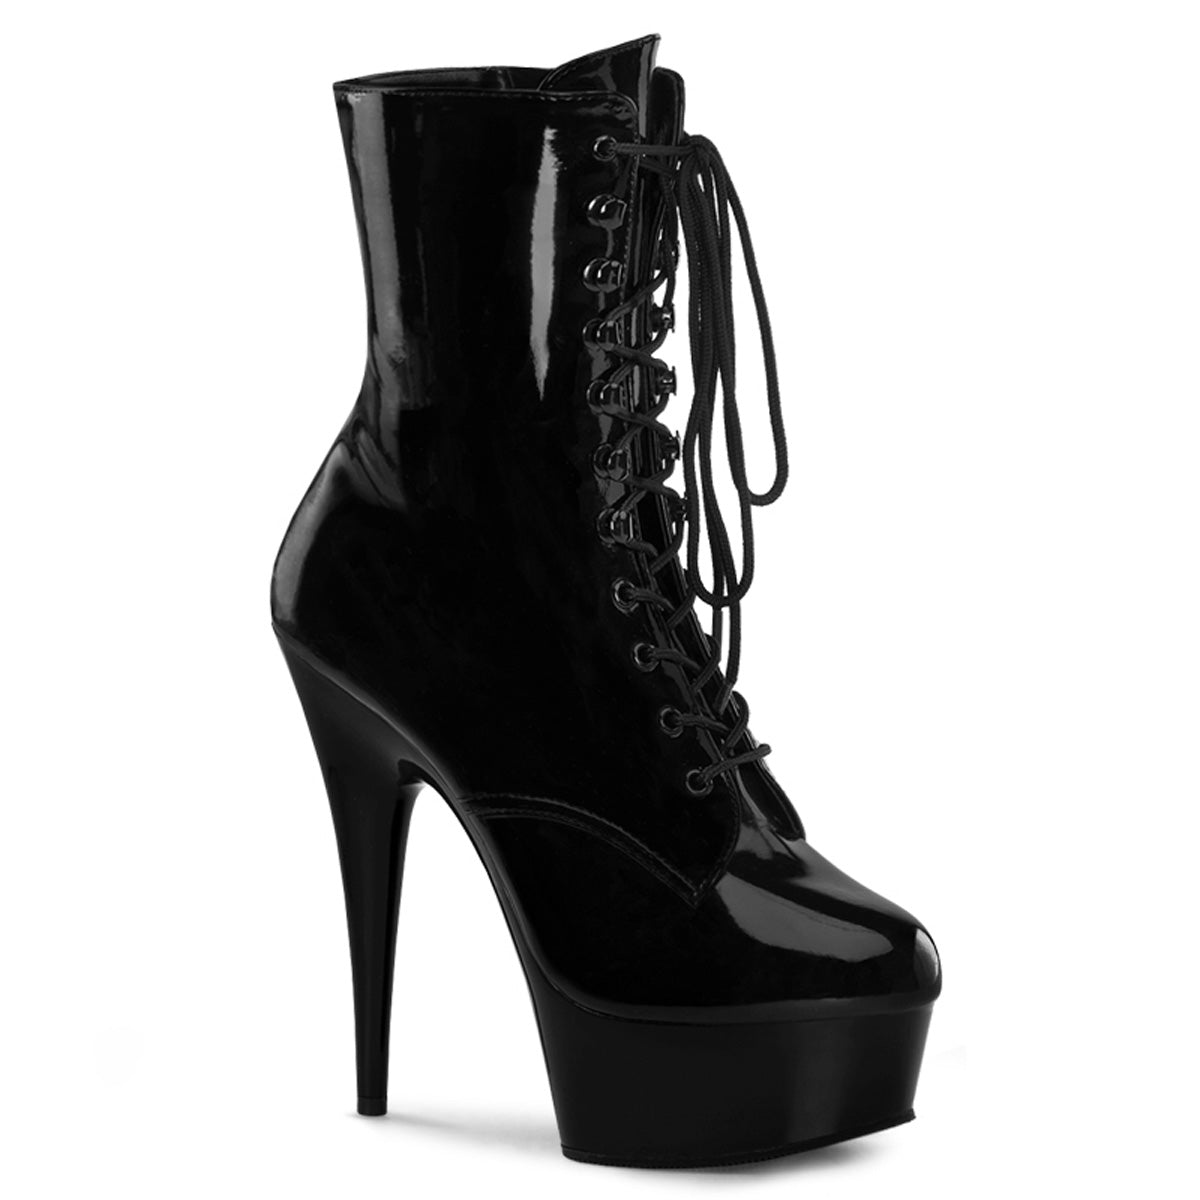 DELIGHT-1020 Black Patent Ankle Boot Pleaser